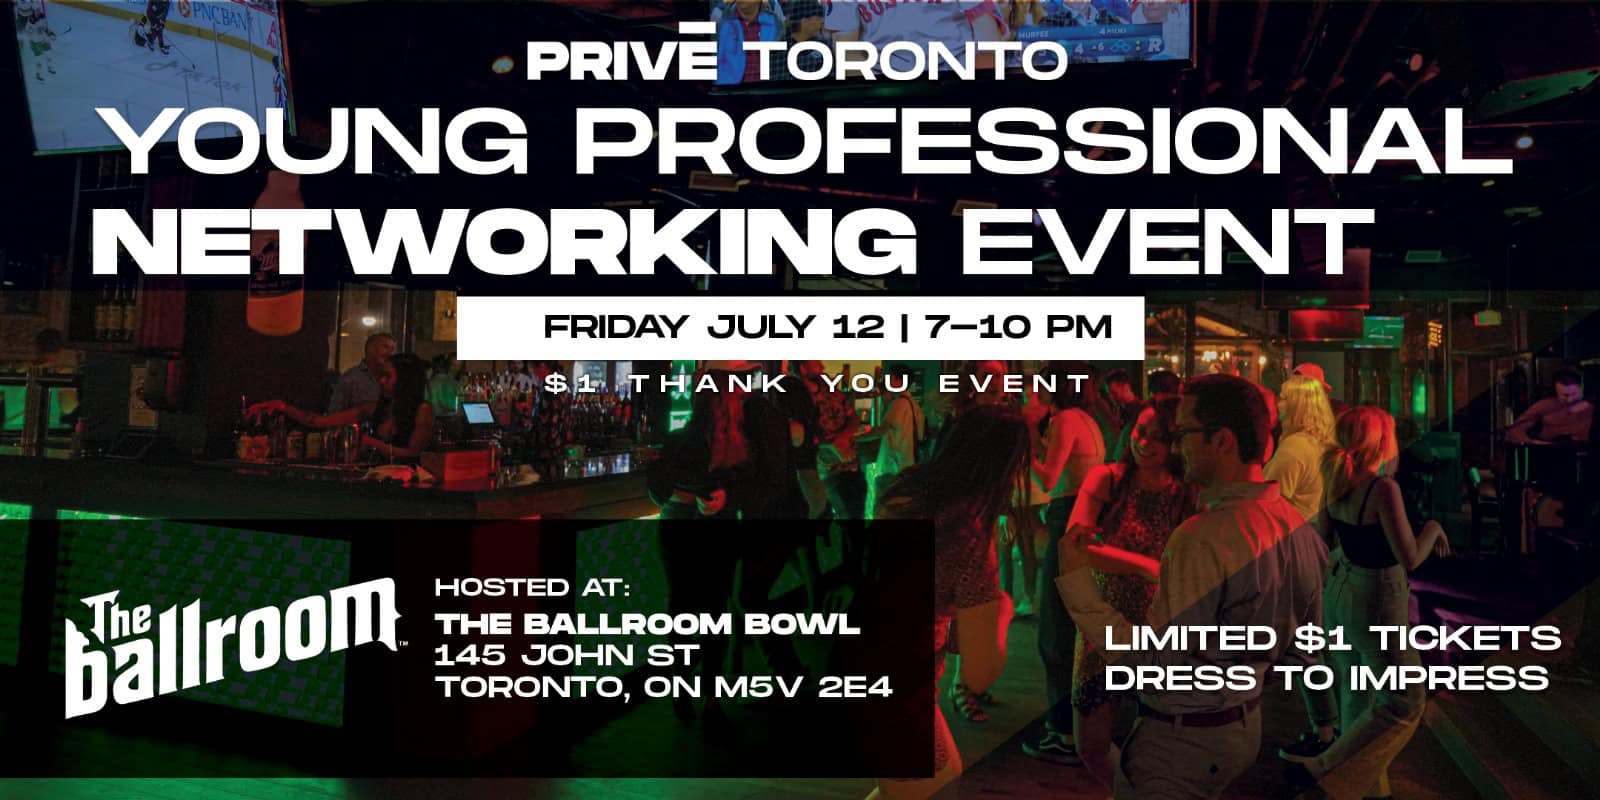 prive toronto networking event july 12